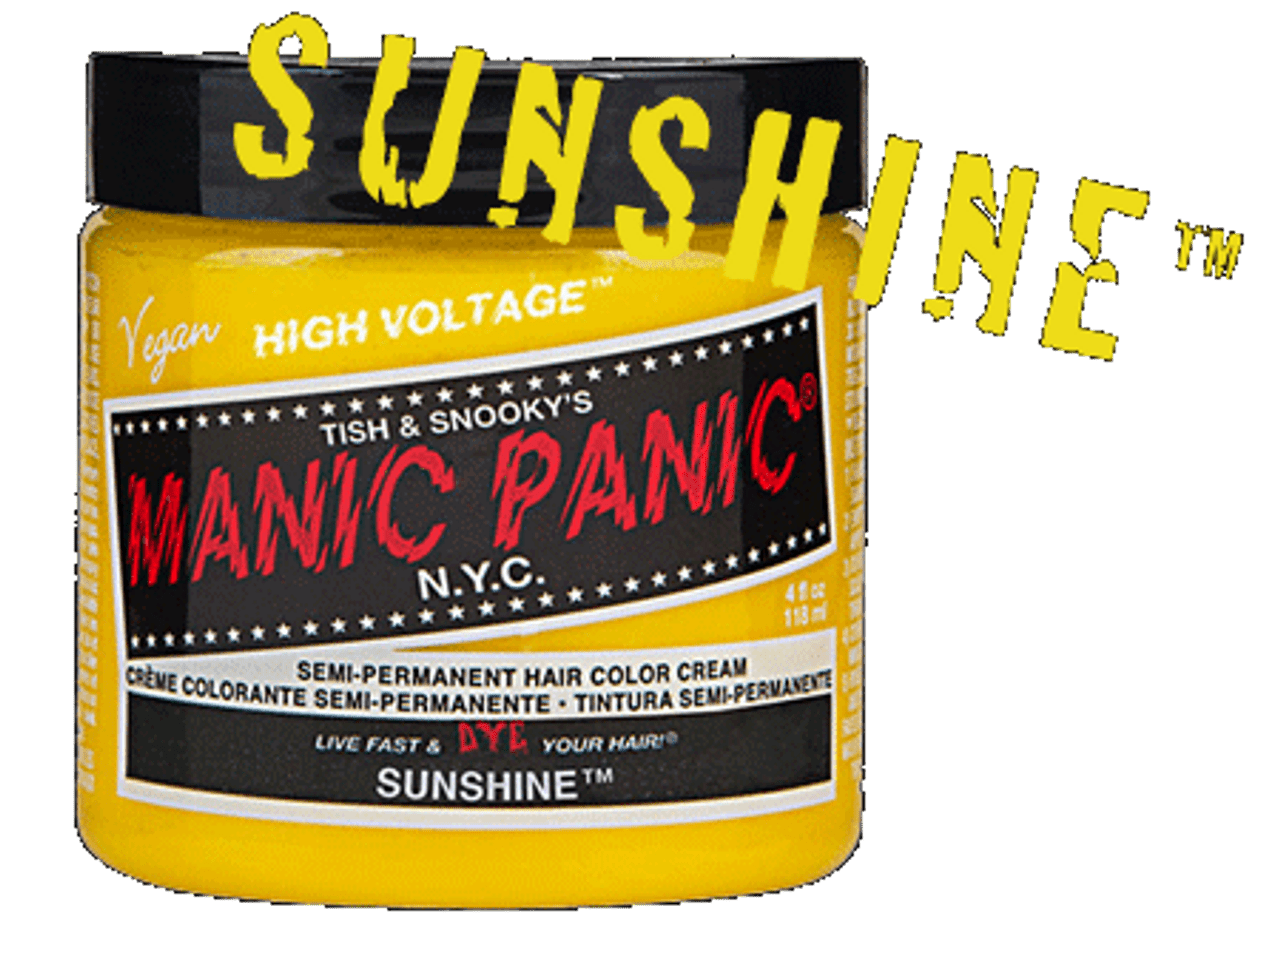 1. Manic Panic Semi-Permanent Hair Color Cream - After Midnight - wide 9